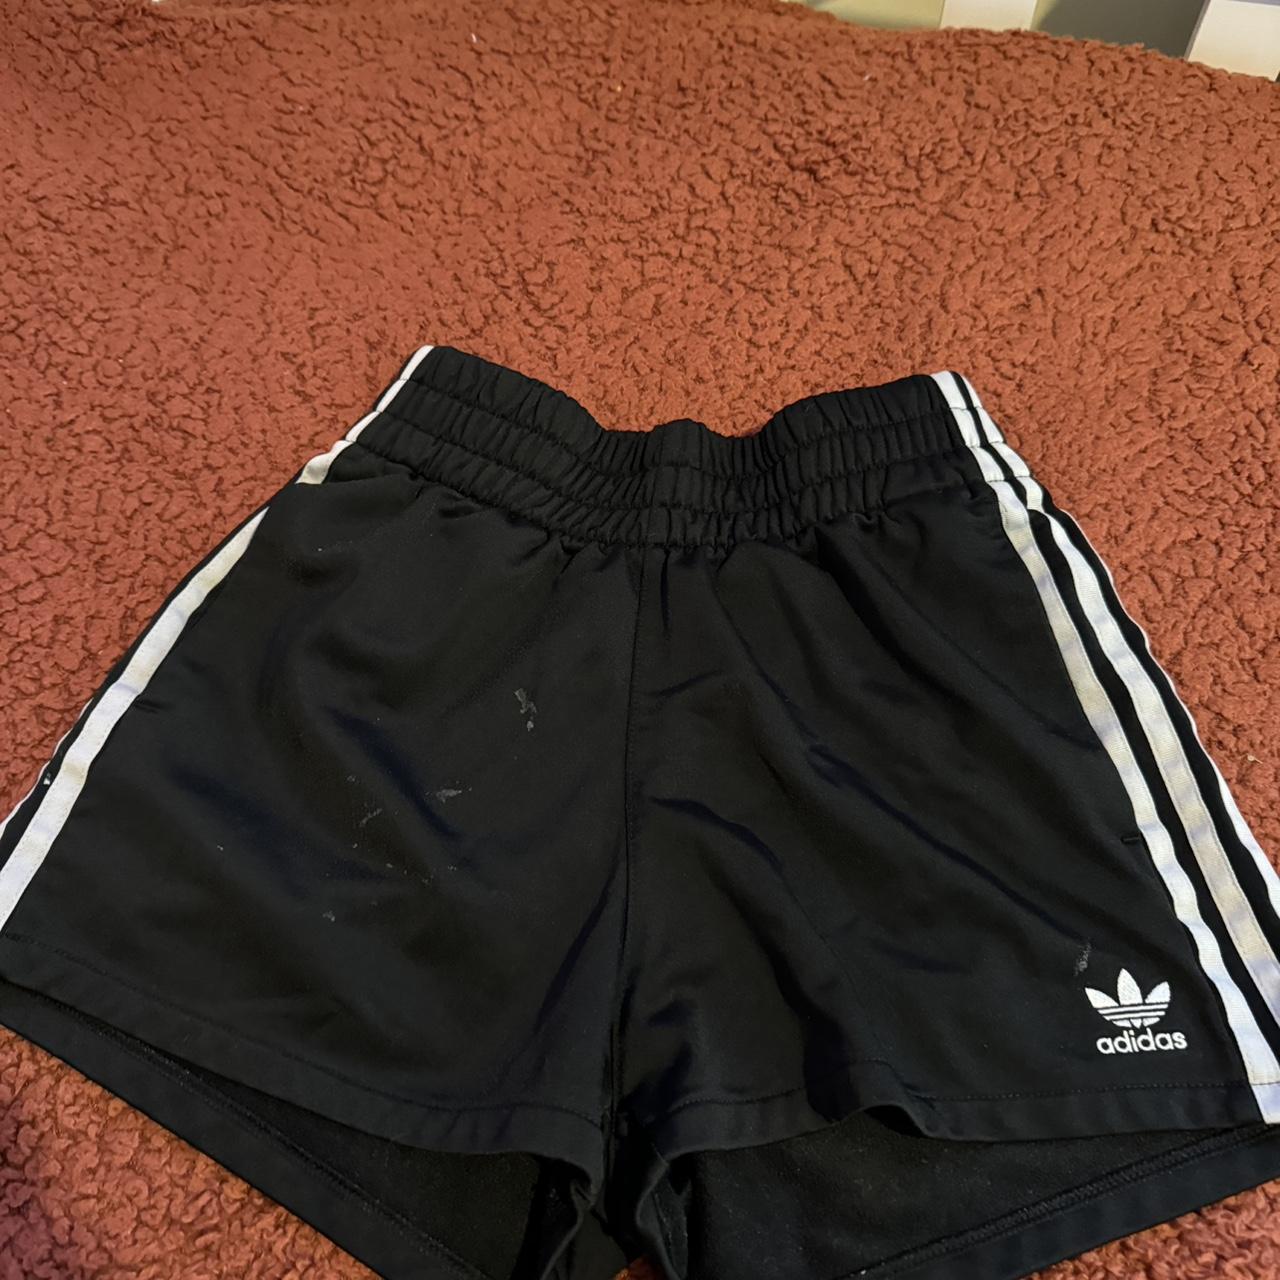 Adidas Black Shorts with White Stripe (Paint Stain) - Depop